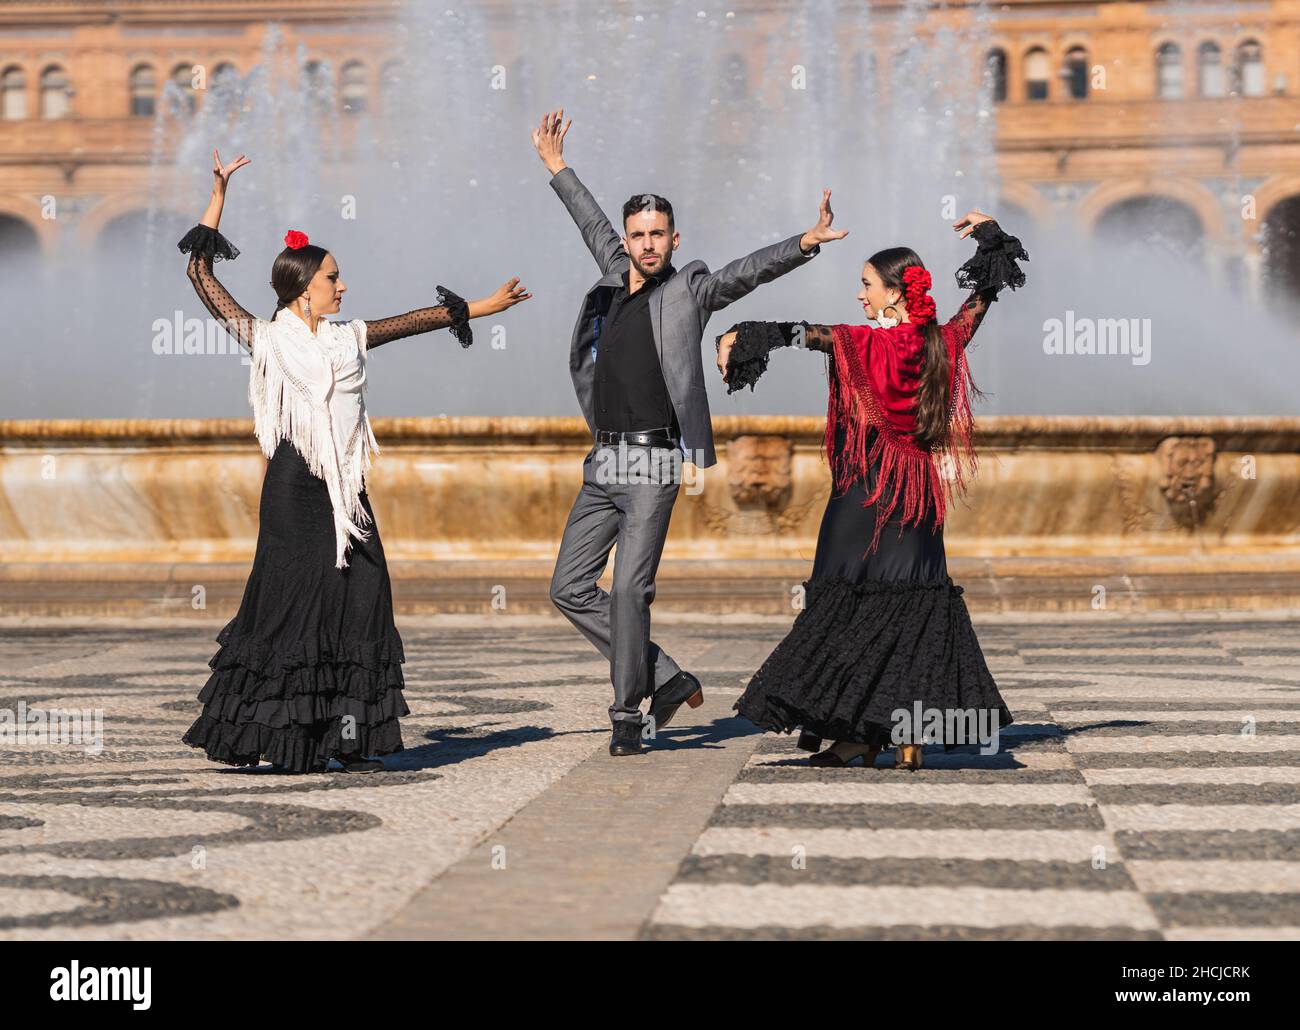 Three people with flamenco outfit dancing in a traditional square Stock Photo